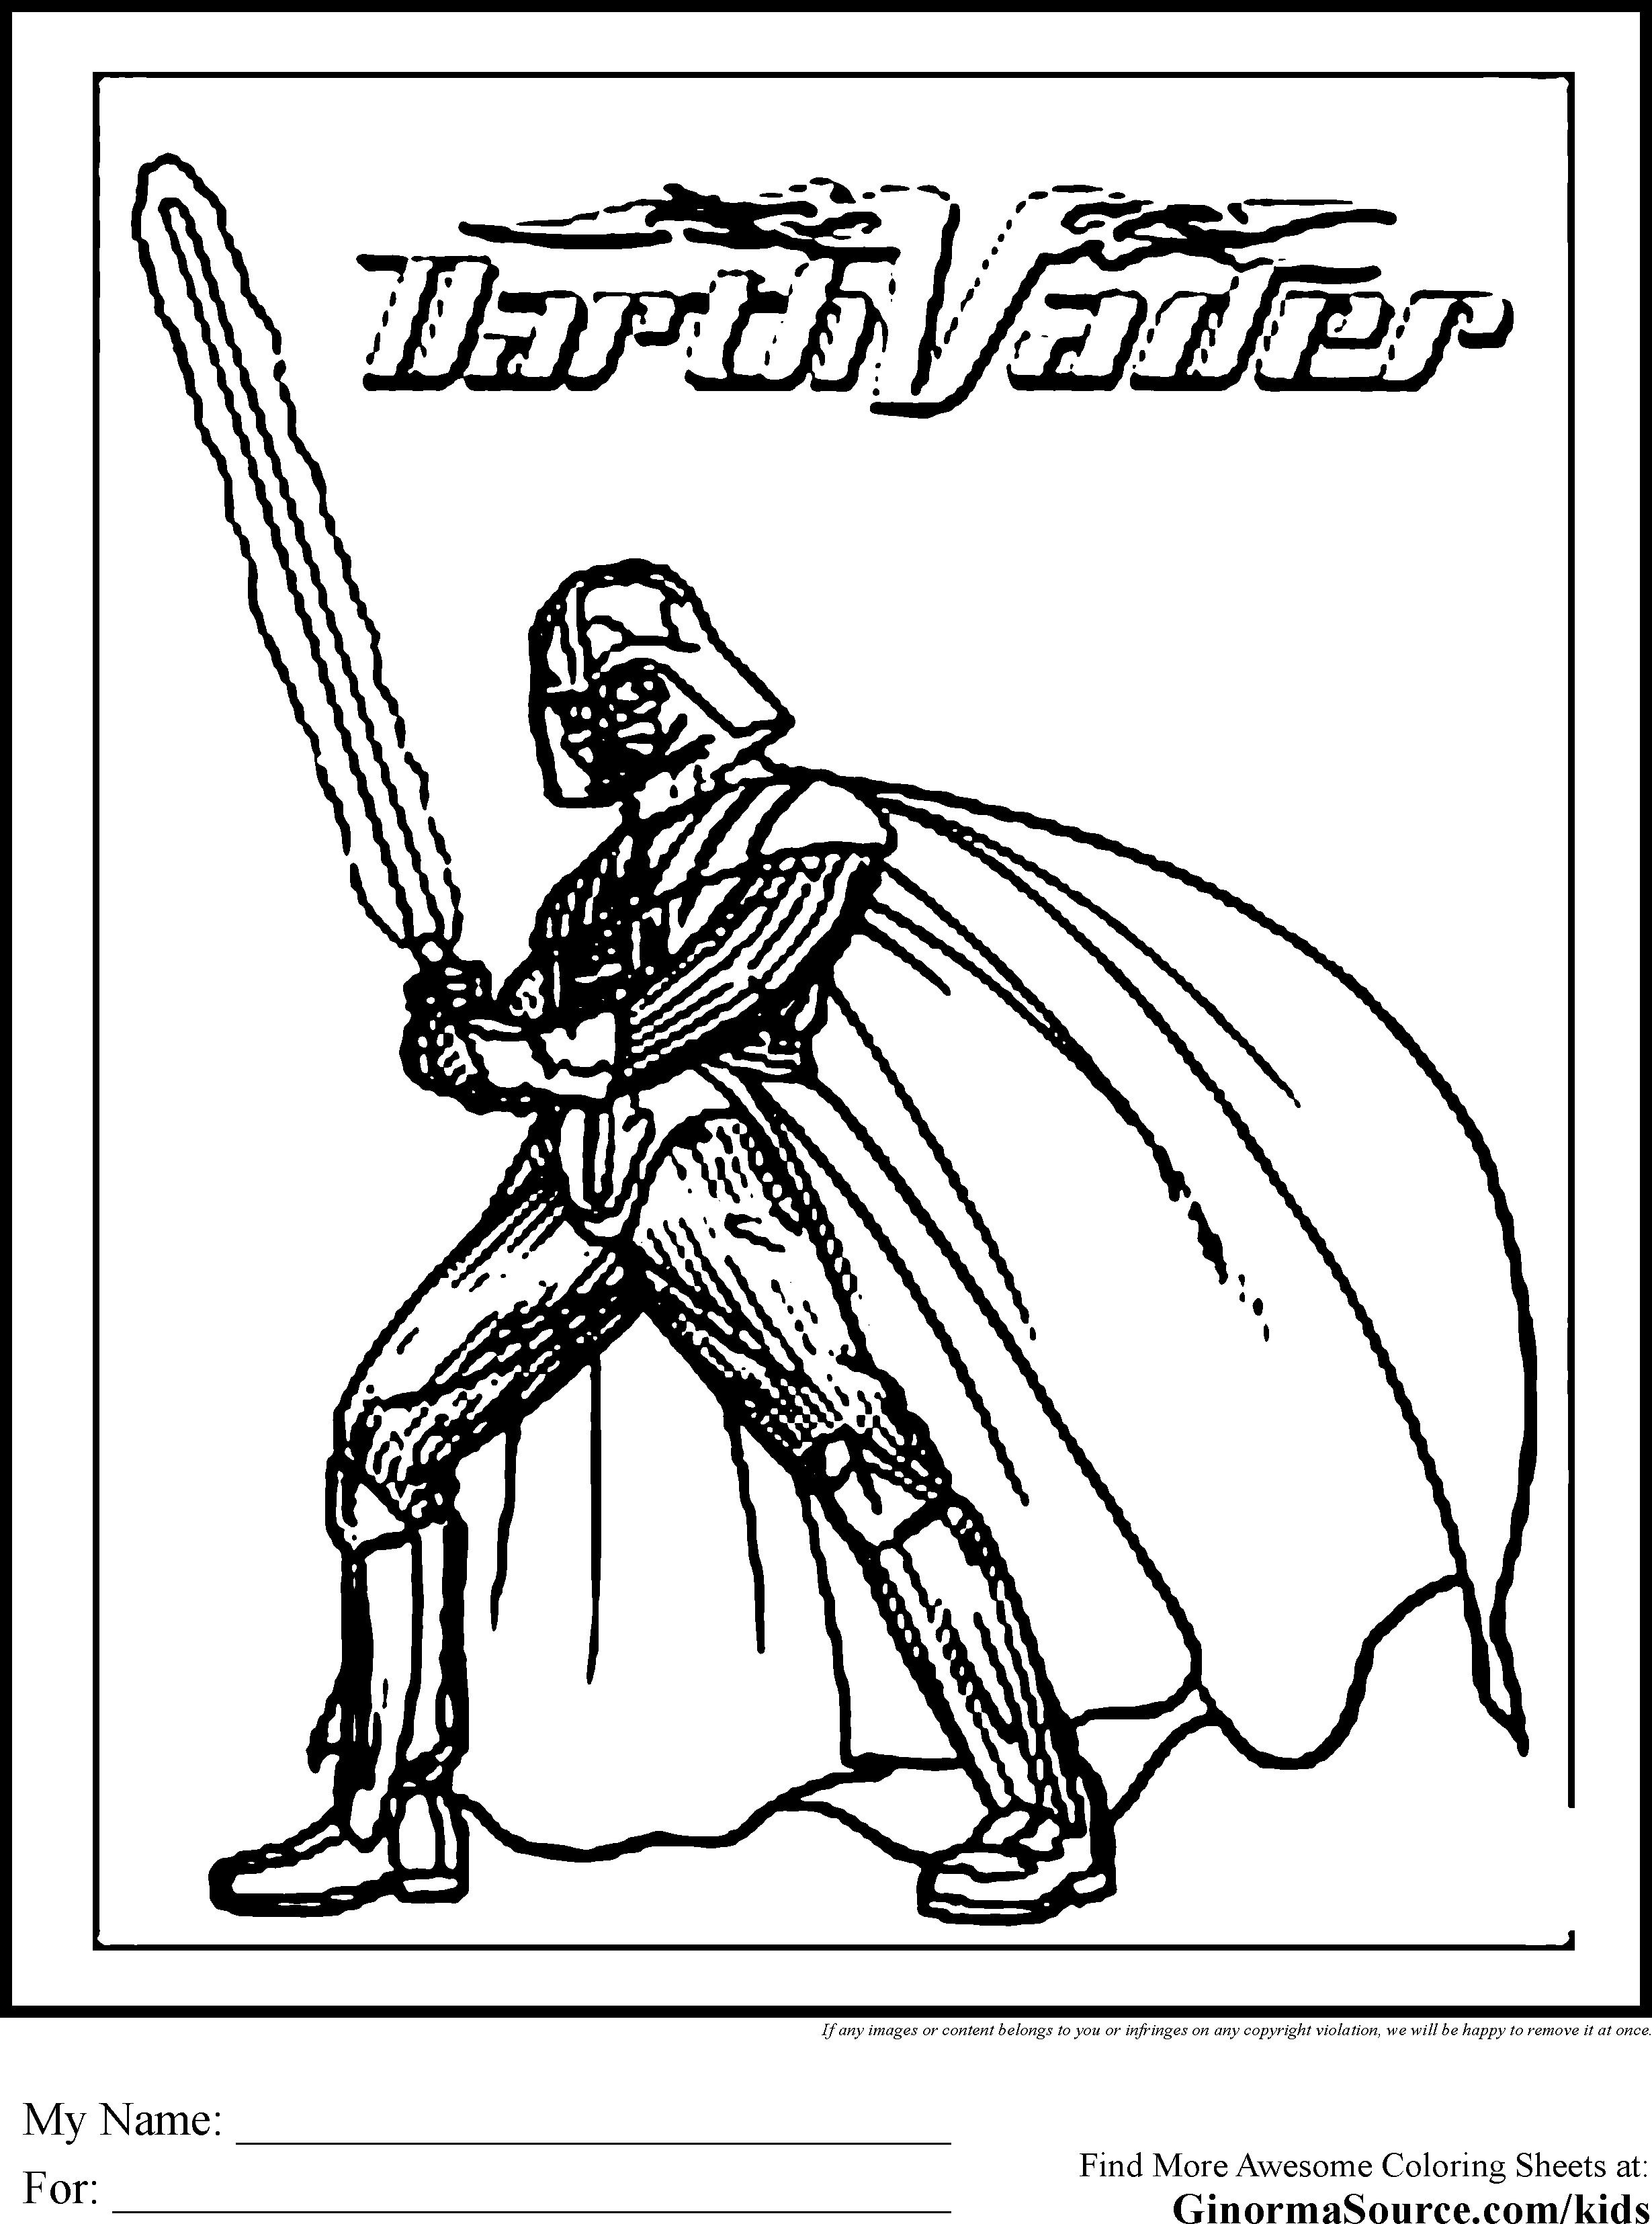 darth vader pictures to color darth vader and laser sword coloring page more star wars color pictures vader darth to 